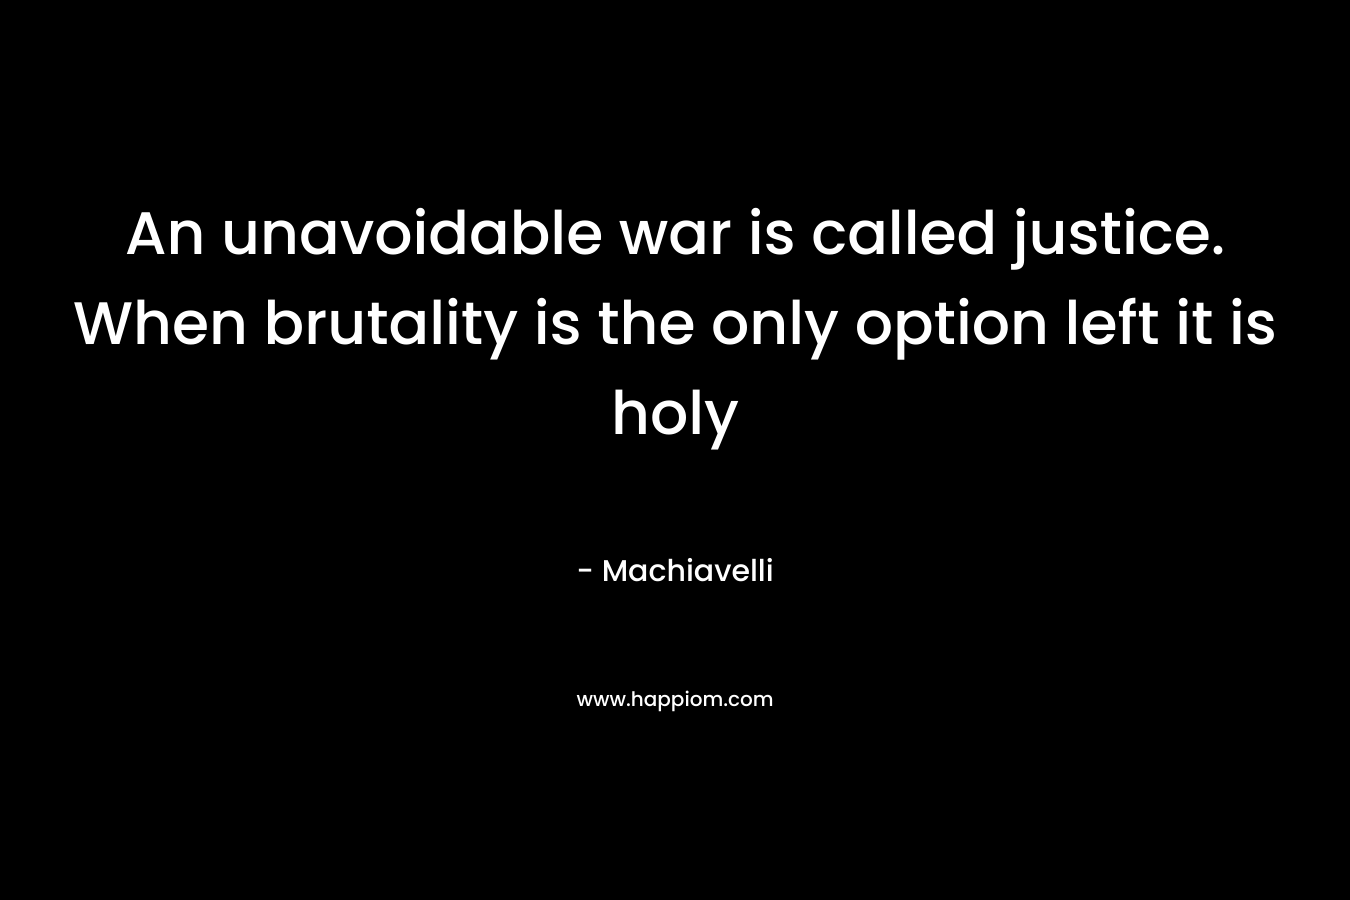 An unavoidable war is called justice. When brutality is the only option left it is holy – Machiavelli